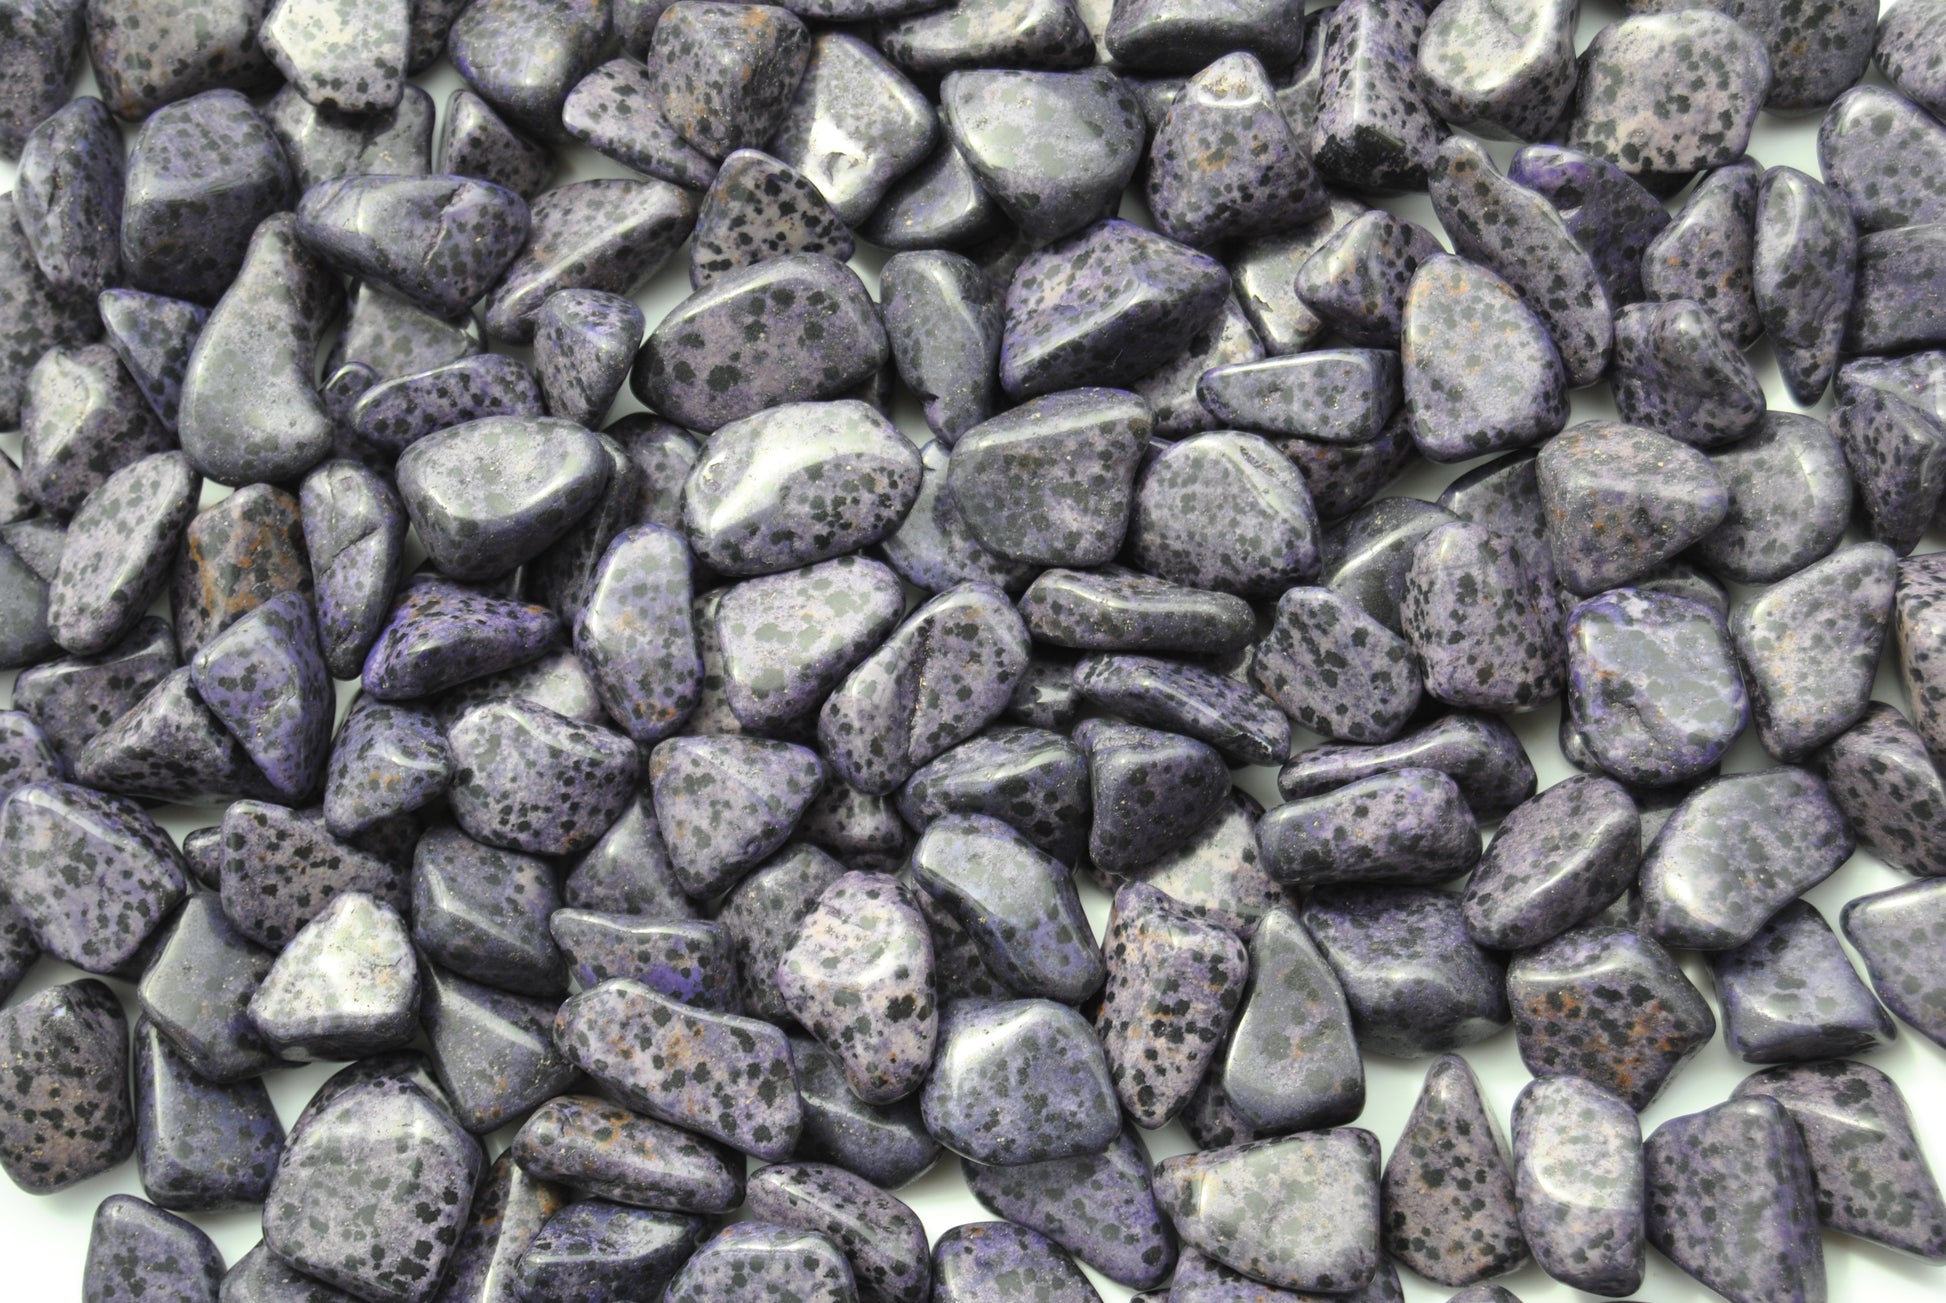 A top down view of an assortment of purple dalmation jasper stones. The stones are a dark purple with black spots.